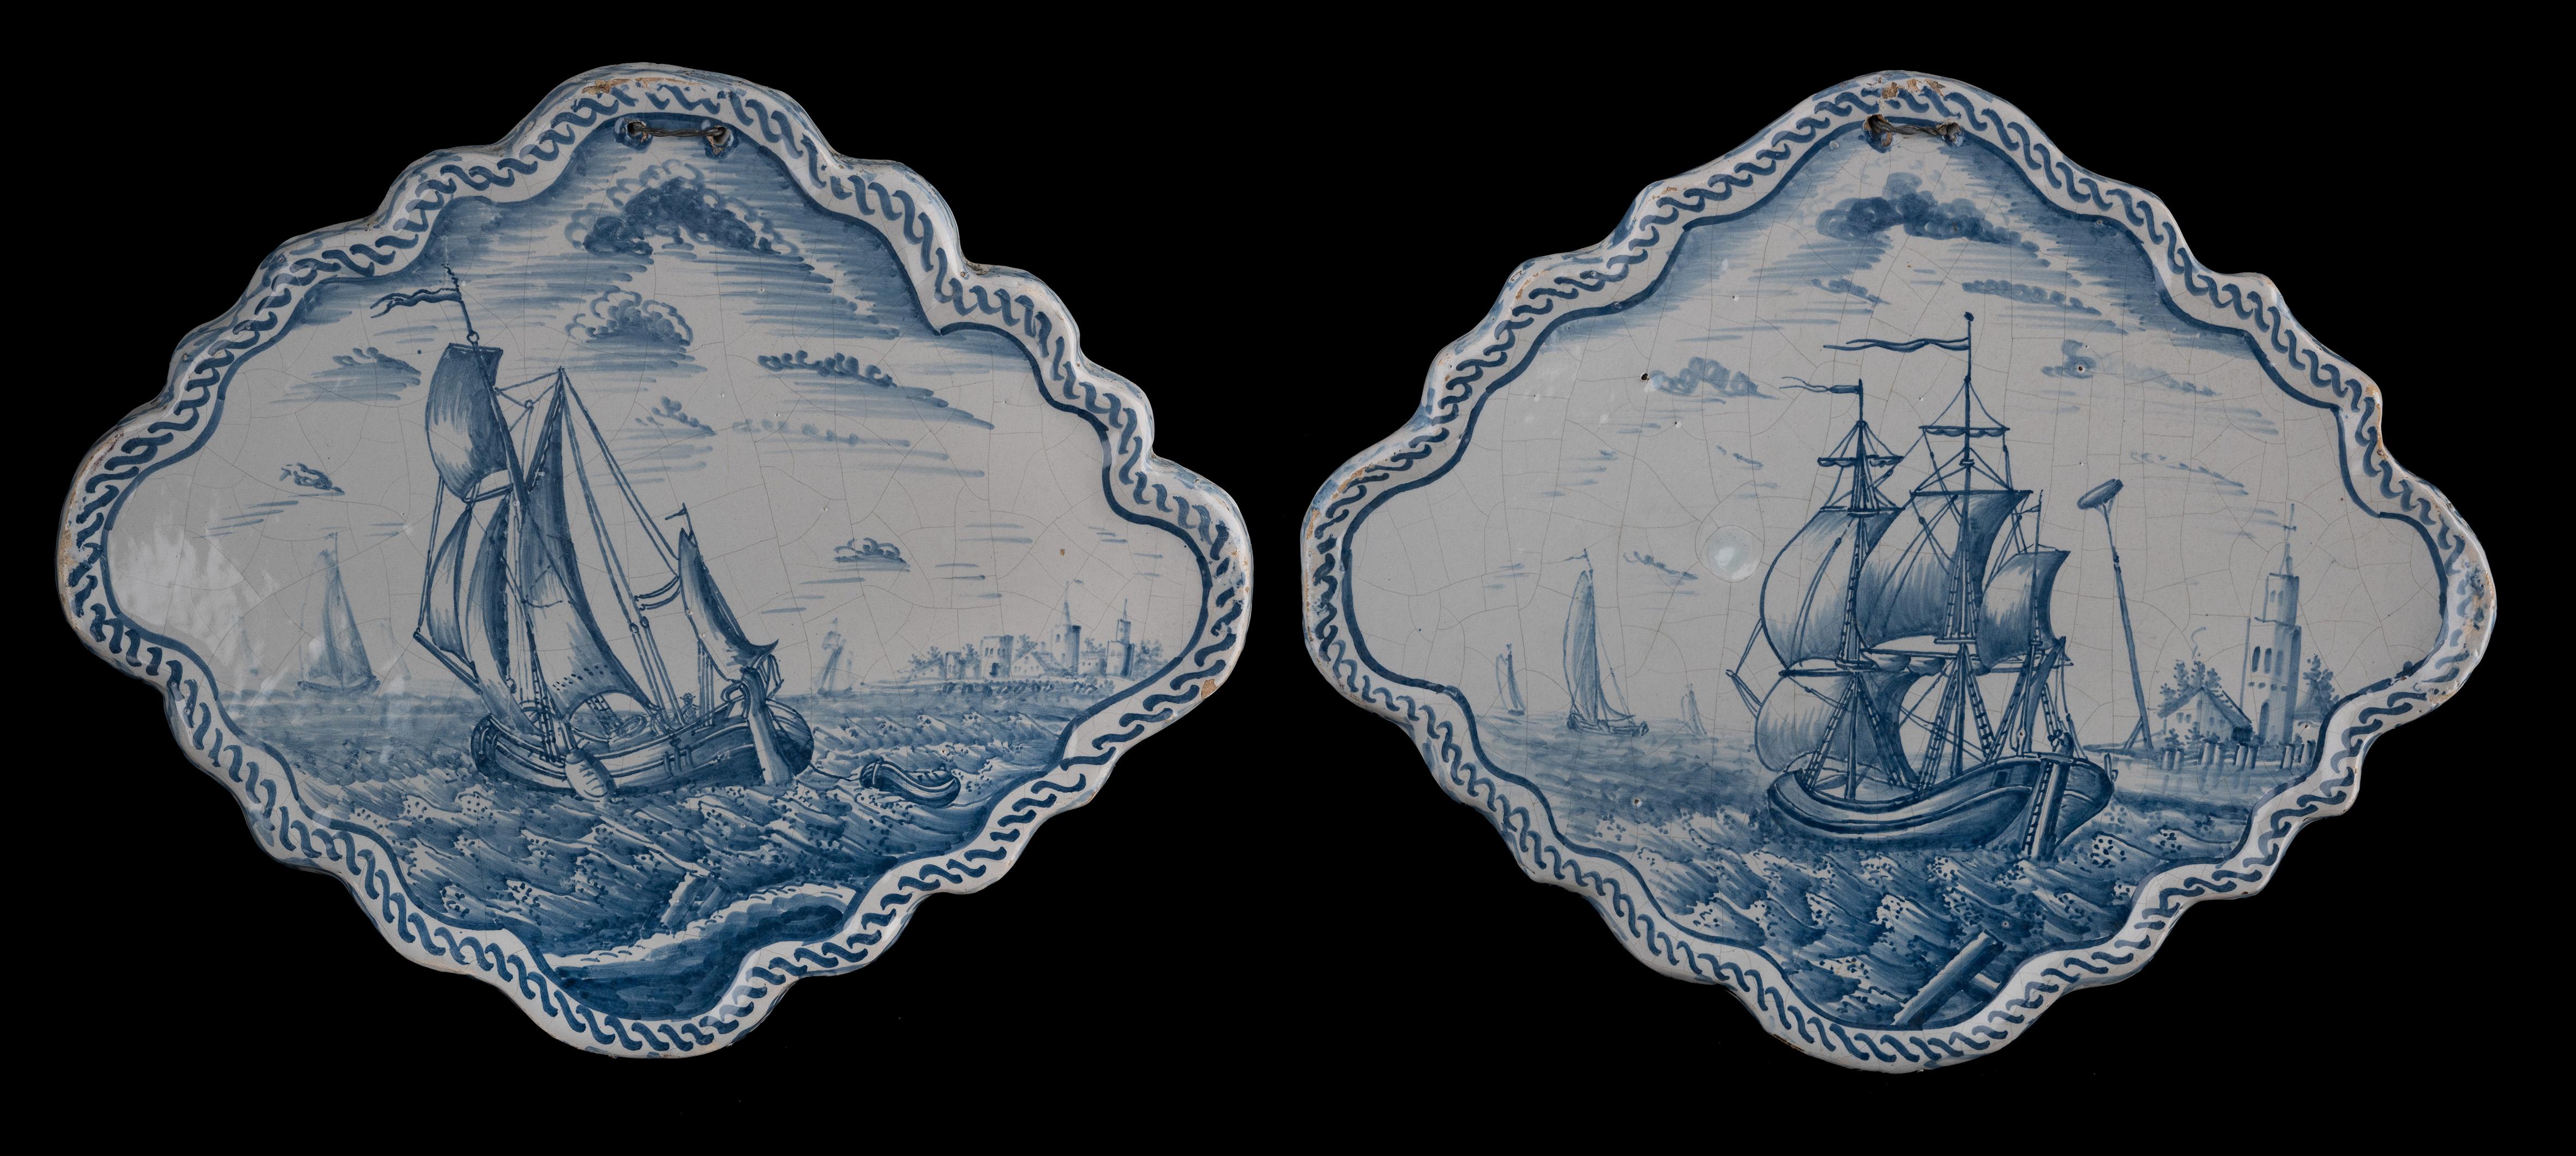 Pair of blue and white plaques with ships off the coast. Makkum, 1784-1800
Kingma pottery painter: Adam Sijbel

The diamond-shaped plaques have a raised, scalloped rim and are each painted with a coastal landscape with ships. In the foreground,